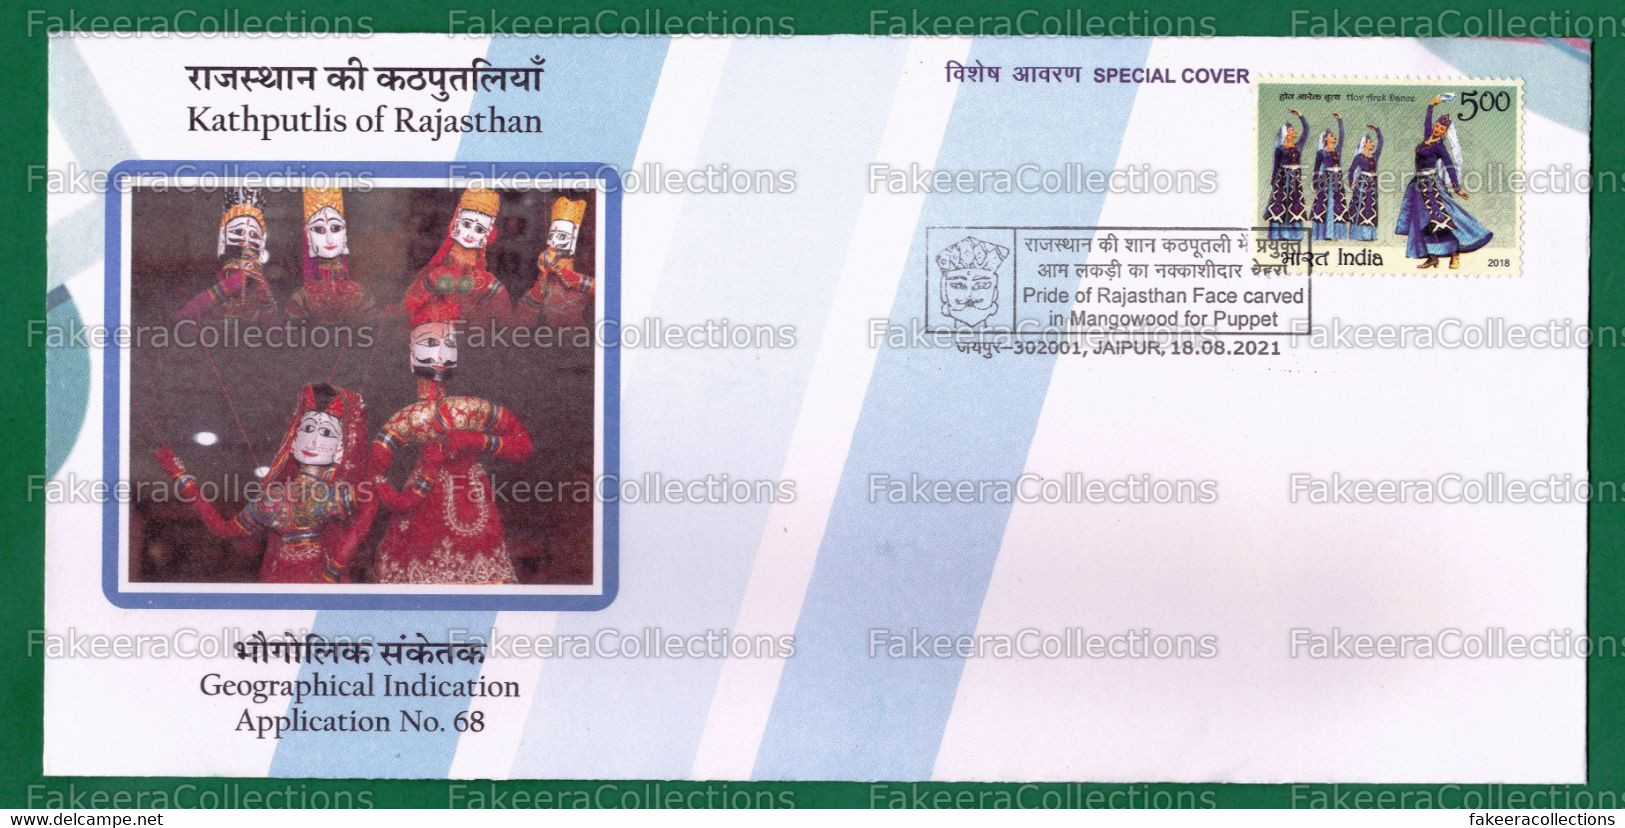 INDIA 2021 Inde Indien - KATHPUTLIS OF RAJASTHAN - Special Postmark Cover - Jaipur 18.08.2021 Puppet, Mango Wood Puppets - Marionette